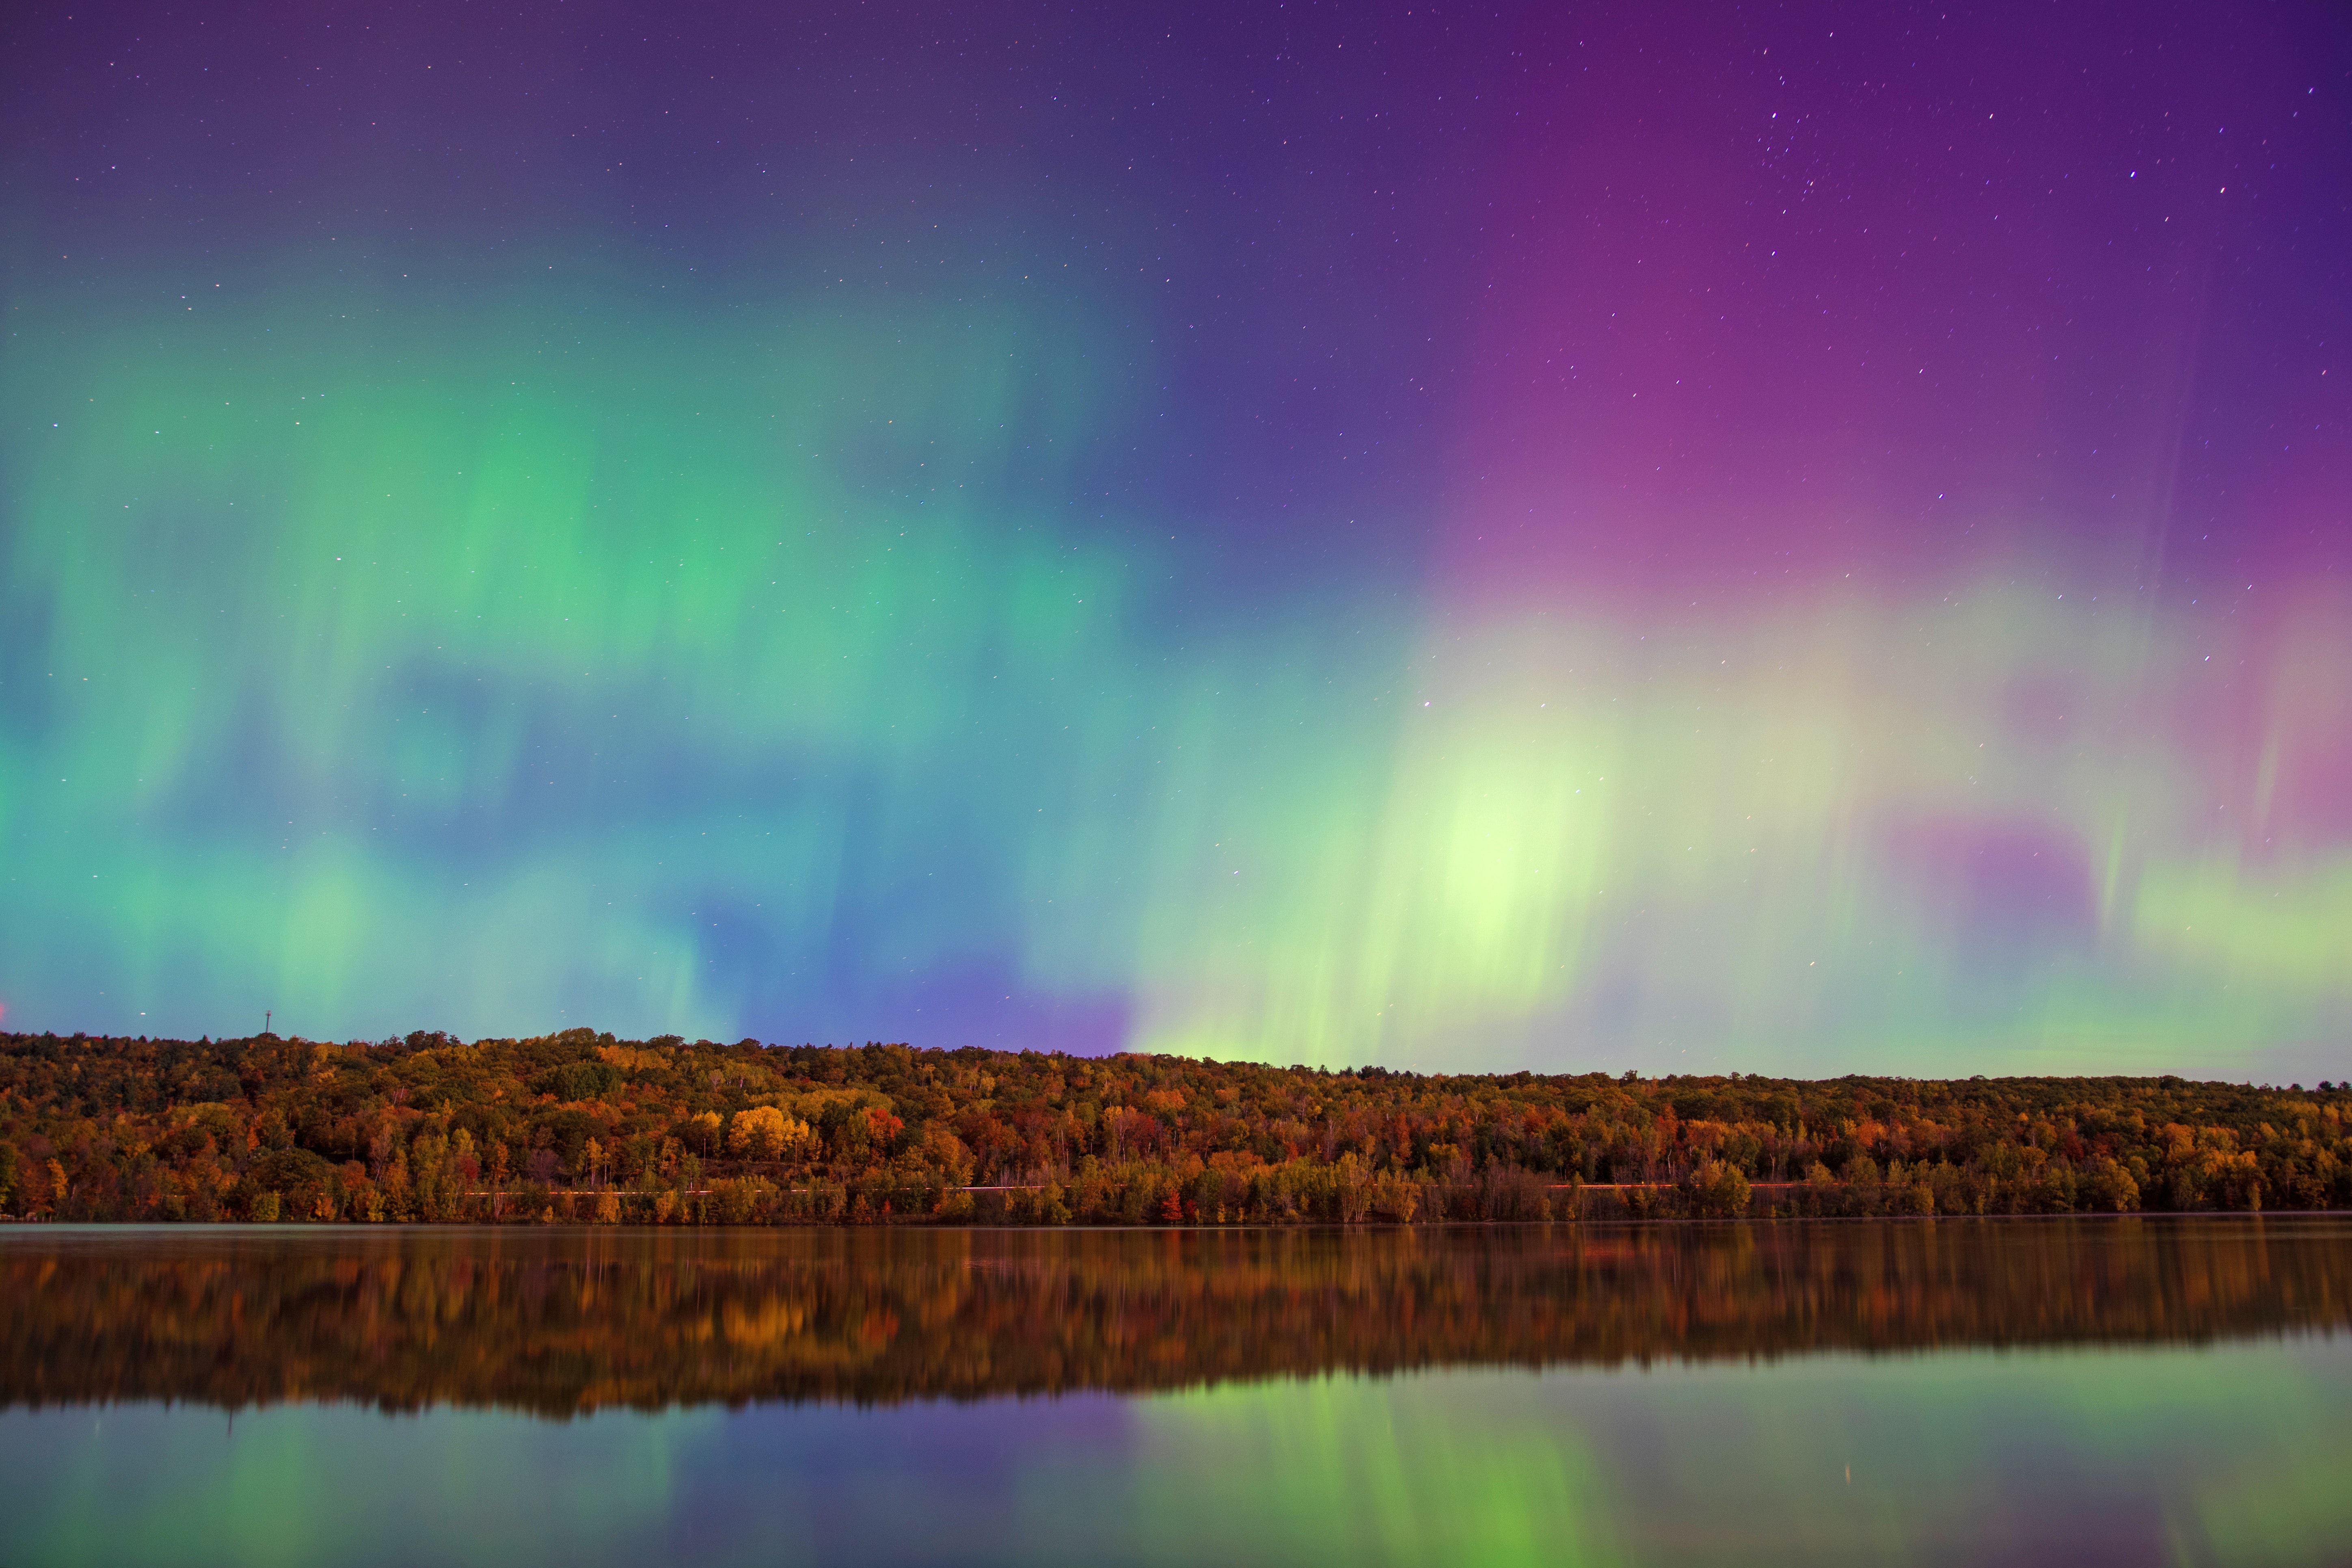 Aurora borealis over trees and a river, made up of green, yellow, pink, and purple. The colors reflect into the river.